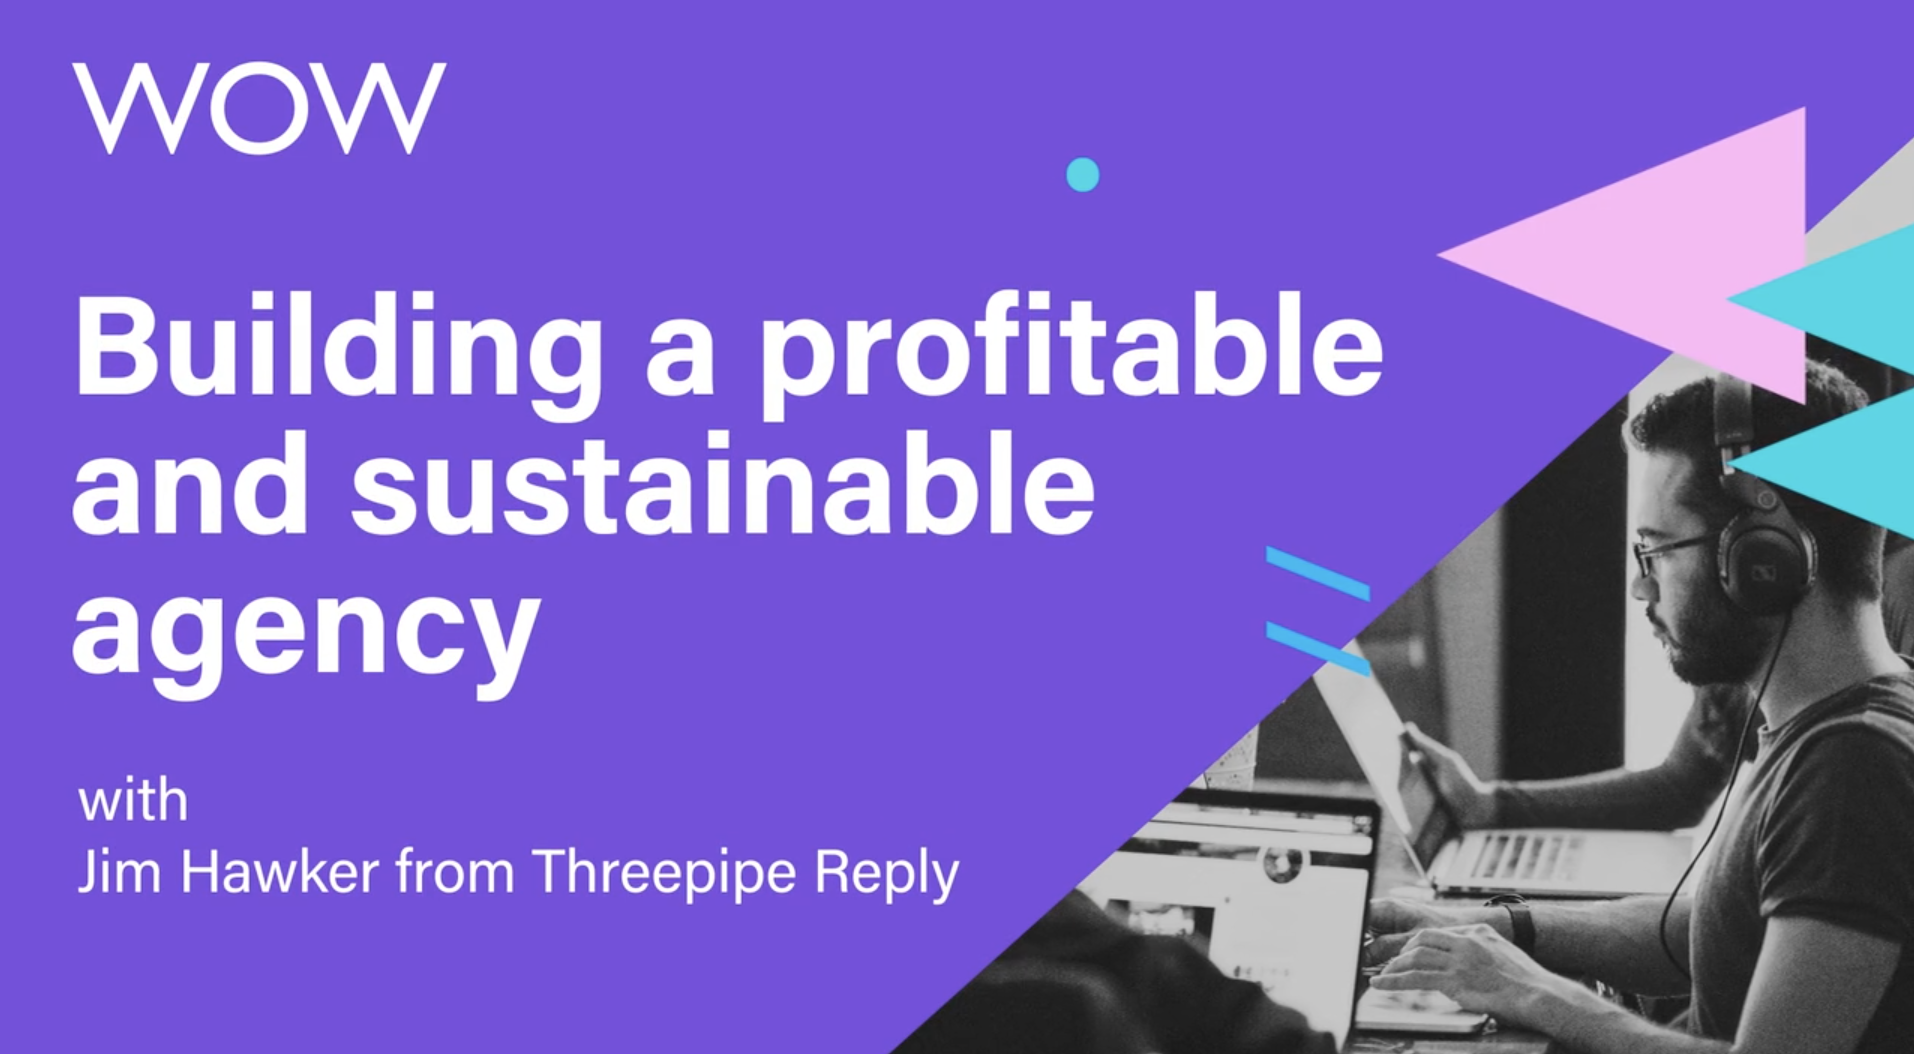 Jim Hawker from Marketing Agency Threepipe Reply on The Wow Company webinar discussing building a profitable and sustainable agency.